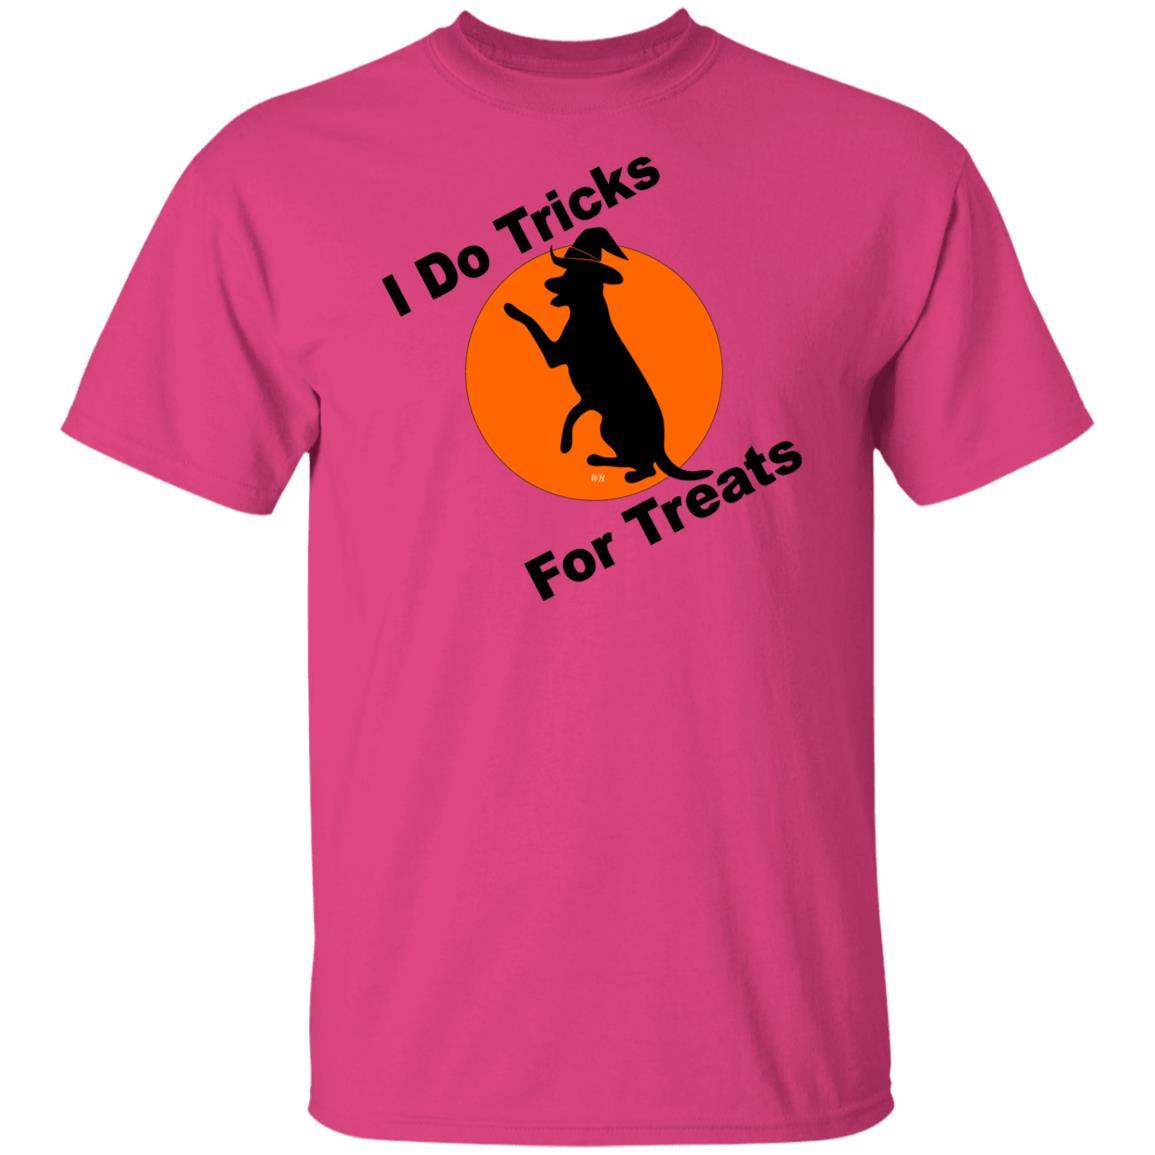 T-Shirts Heliconia / S WineyBitches.Co "I Do Tricks For Treats" Dog- Ultra Cotton T-Shirt WineyBitchesCo